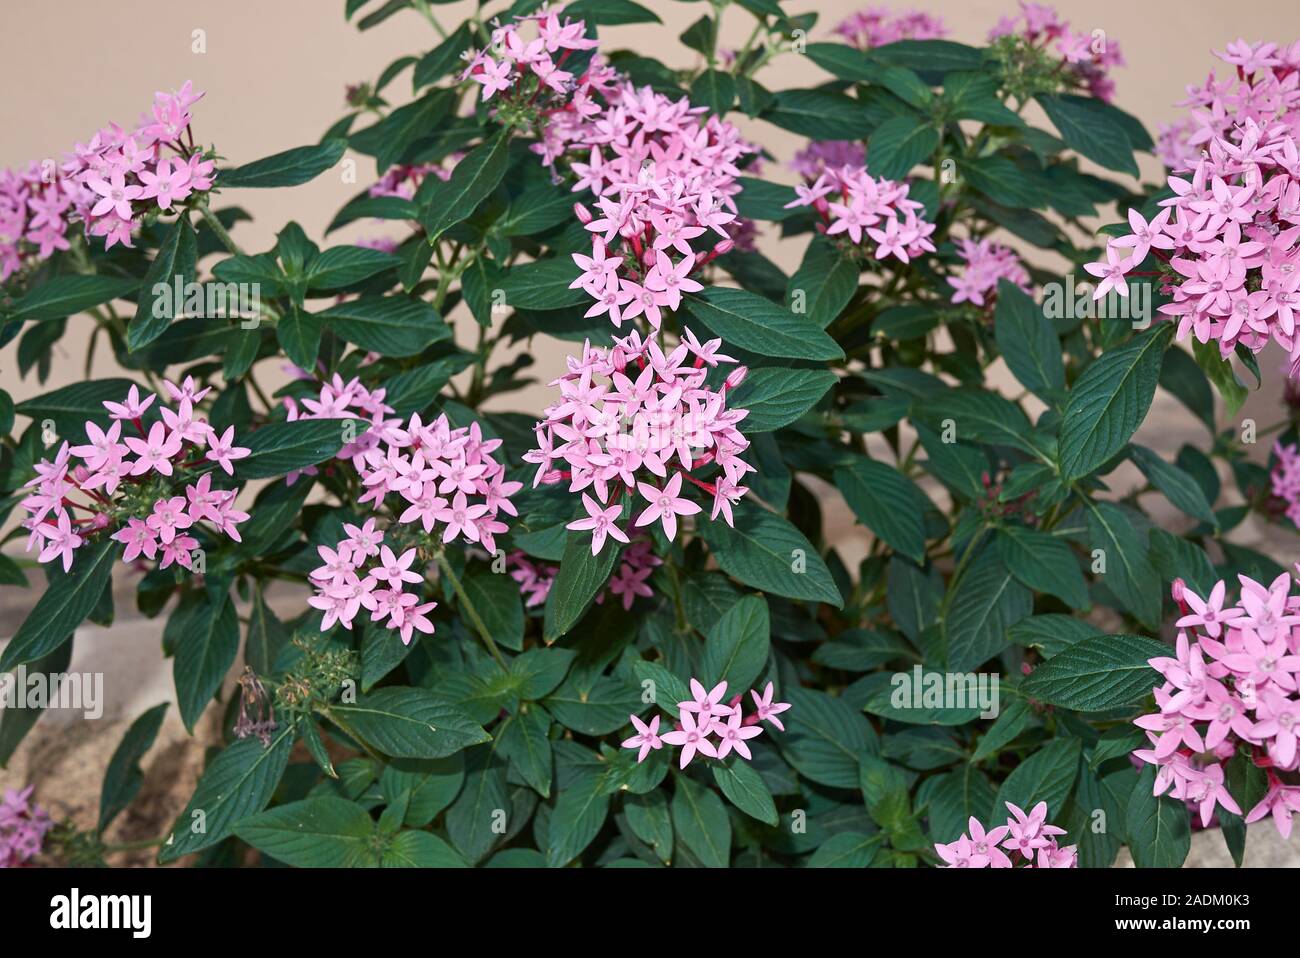 pink flowers of Pentas lanceolata plants in a garden Stock Photo